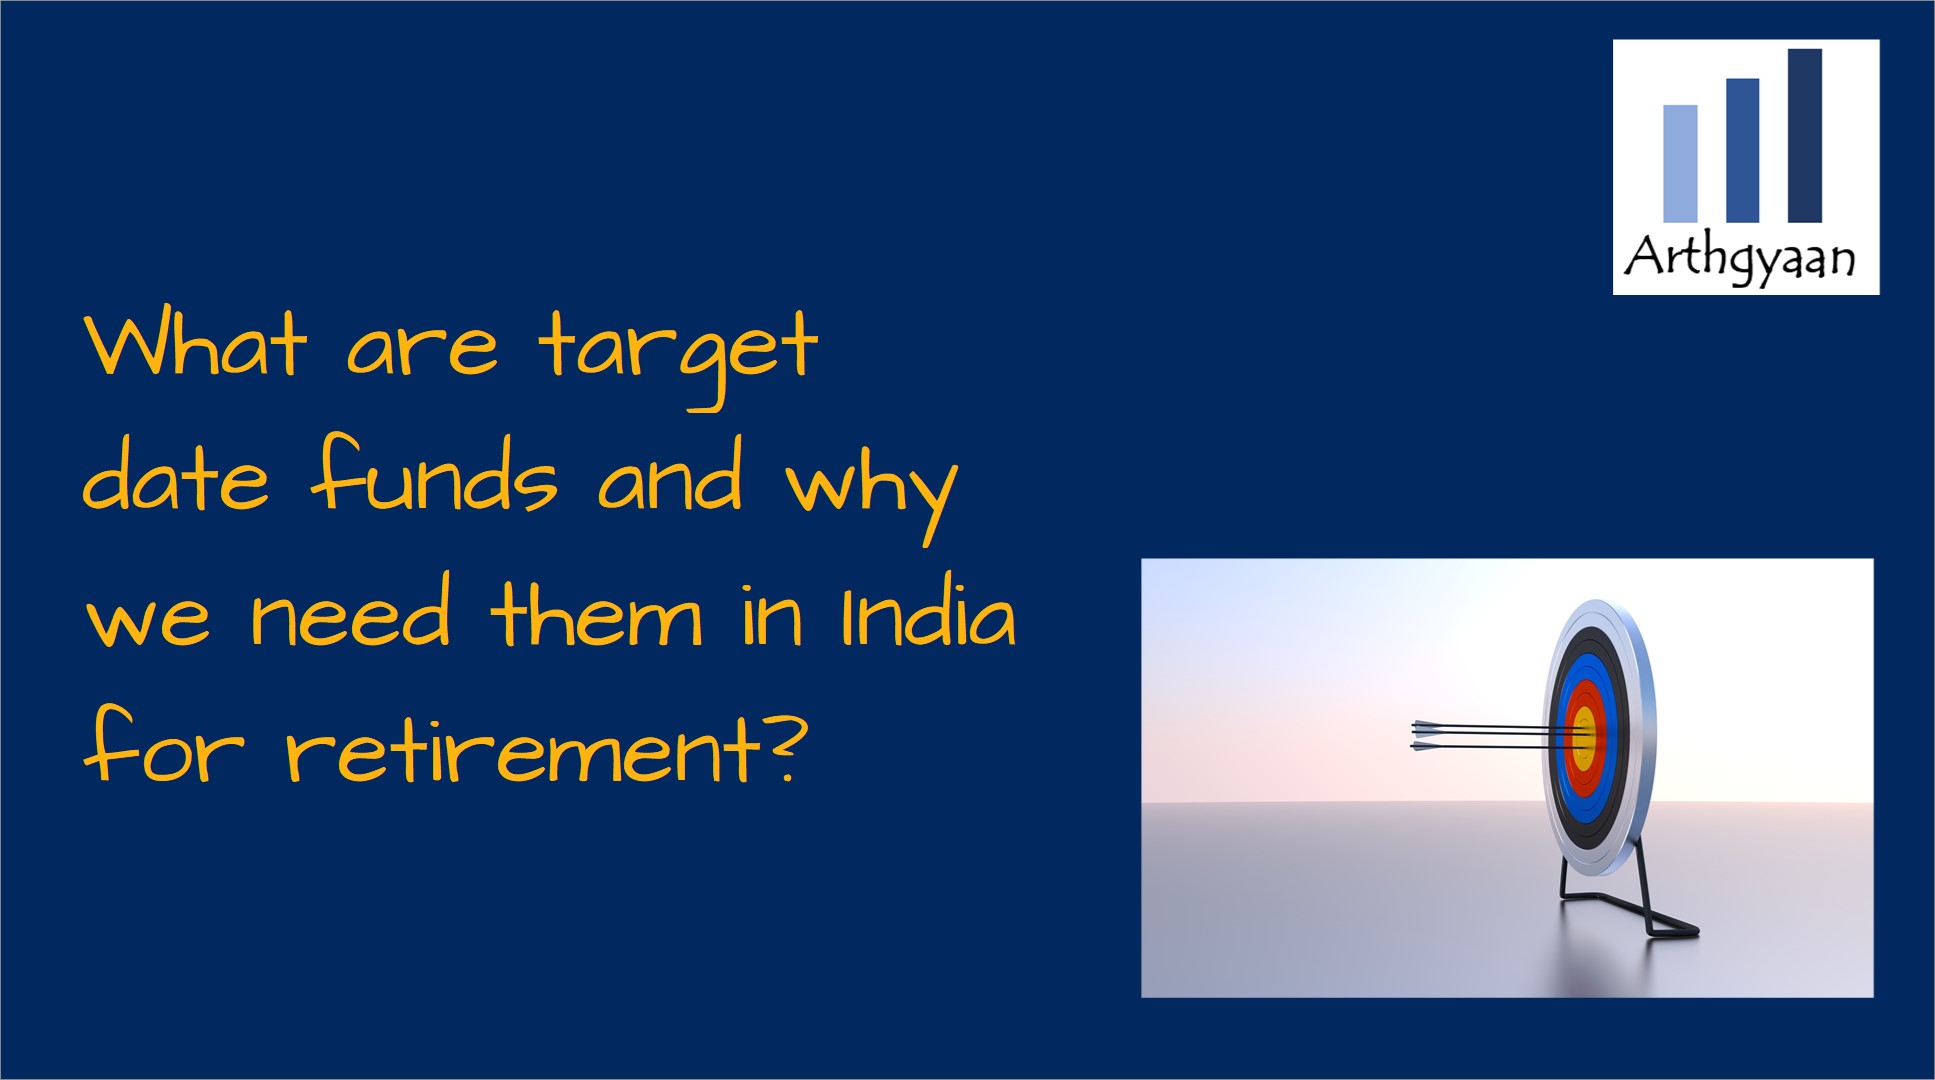 What are target date funds and why do we need them in India for retirement?